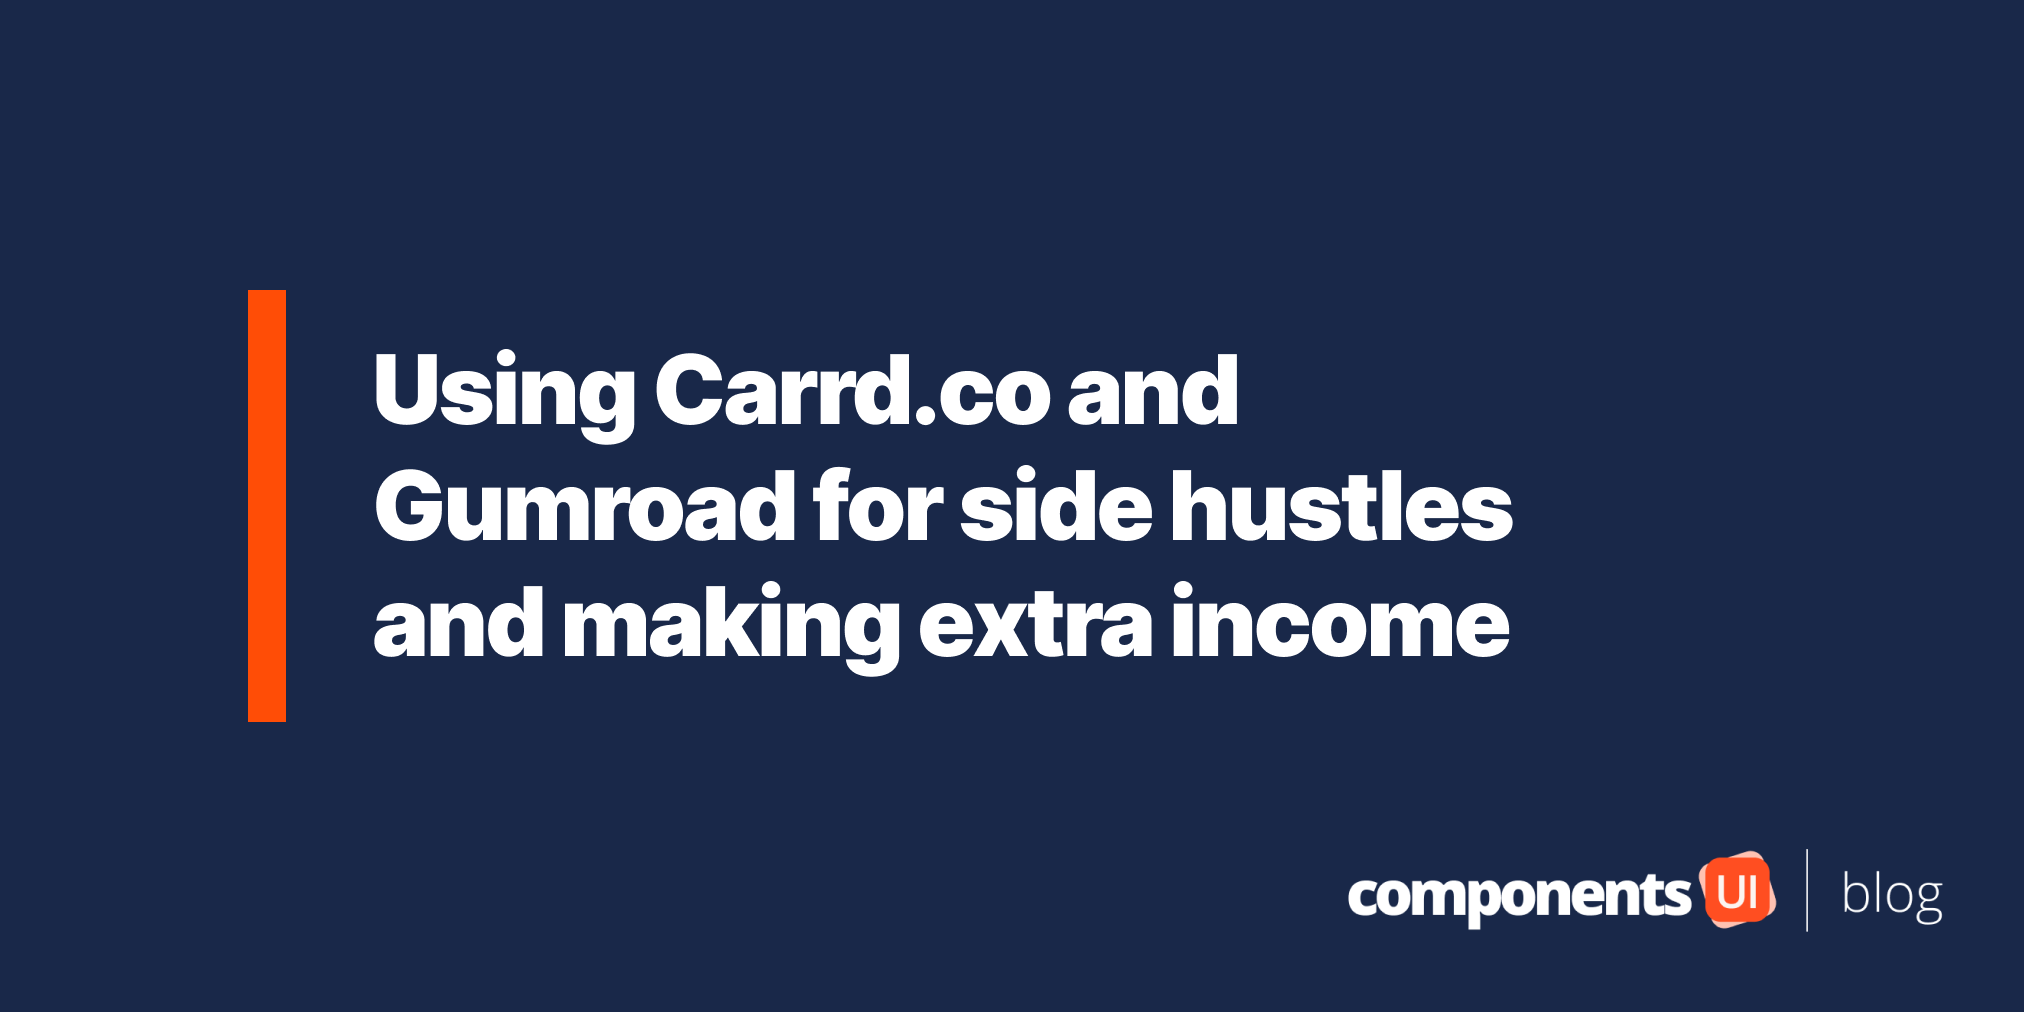 Using Carrd.co and Gumroad for side hustles and making extra